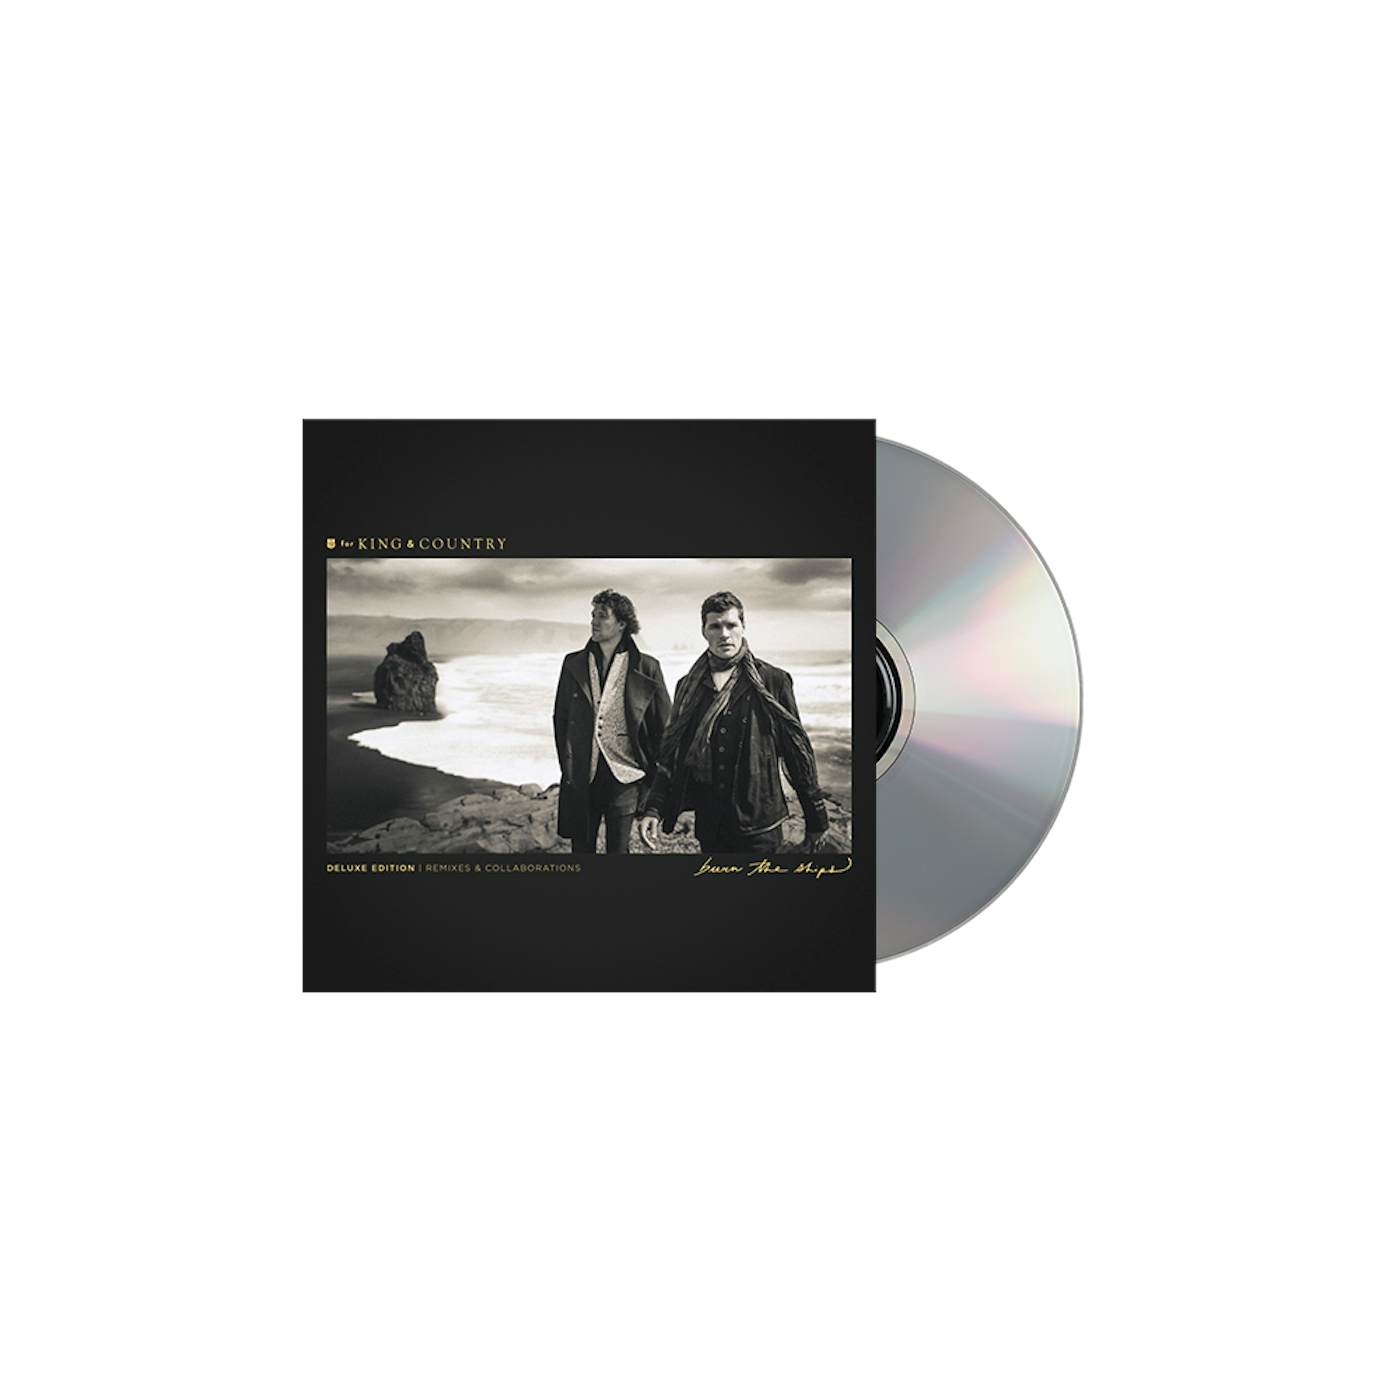 for KING & COUNTRY Burn The Ships (Deluxe Edition: Remixes & Collaborations) - CD